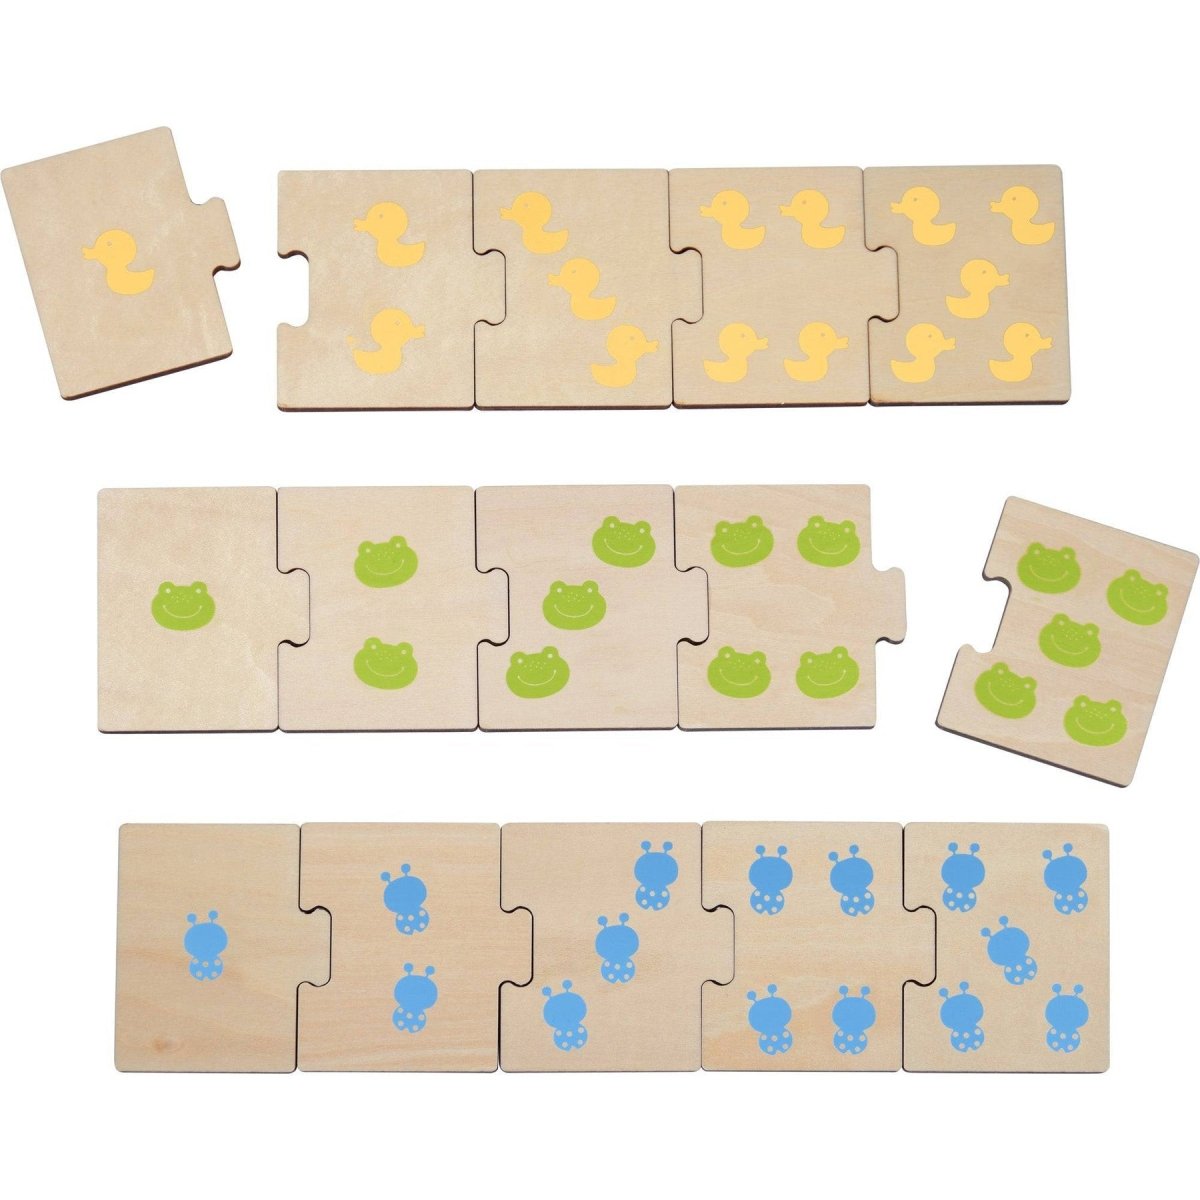 Wooden Frog Matching Game by Haba - Challenge & Fun, Inc.-HB305781-2